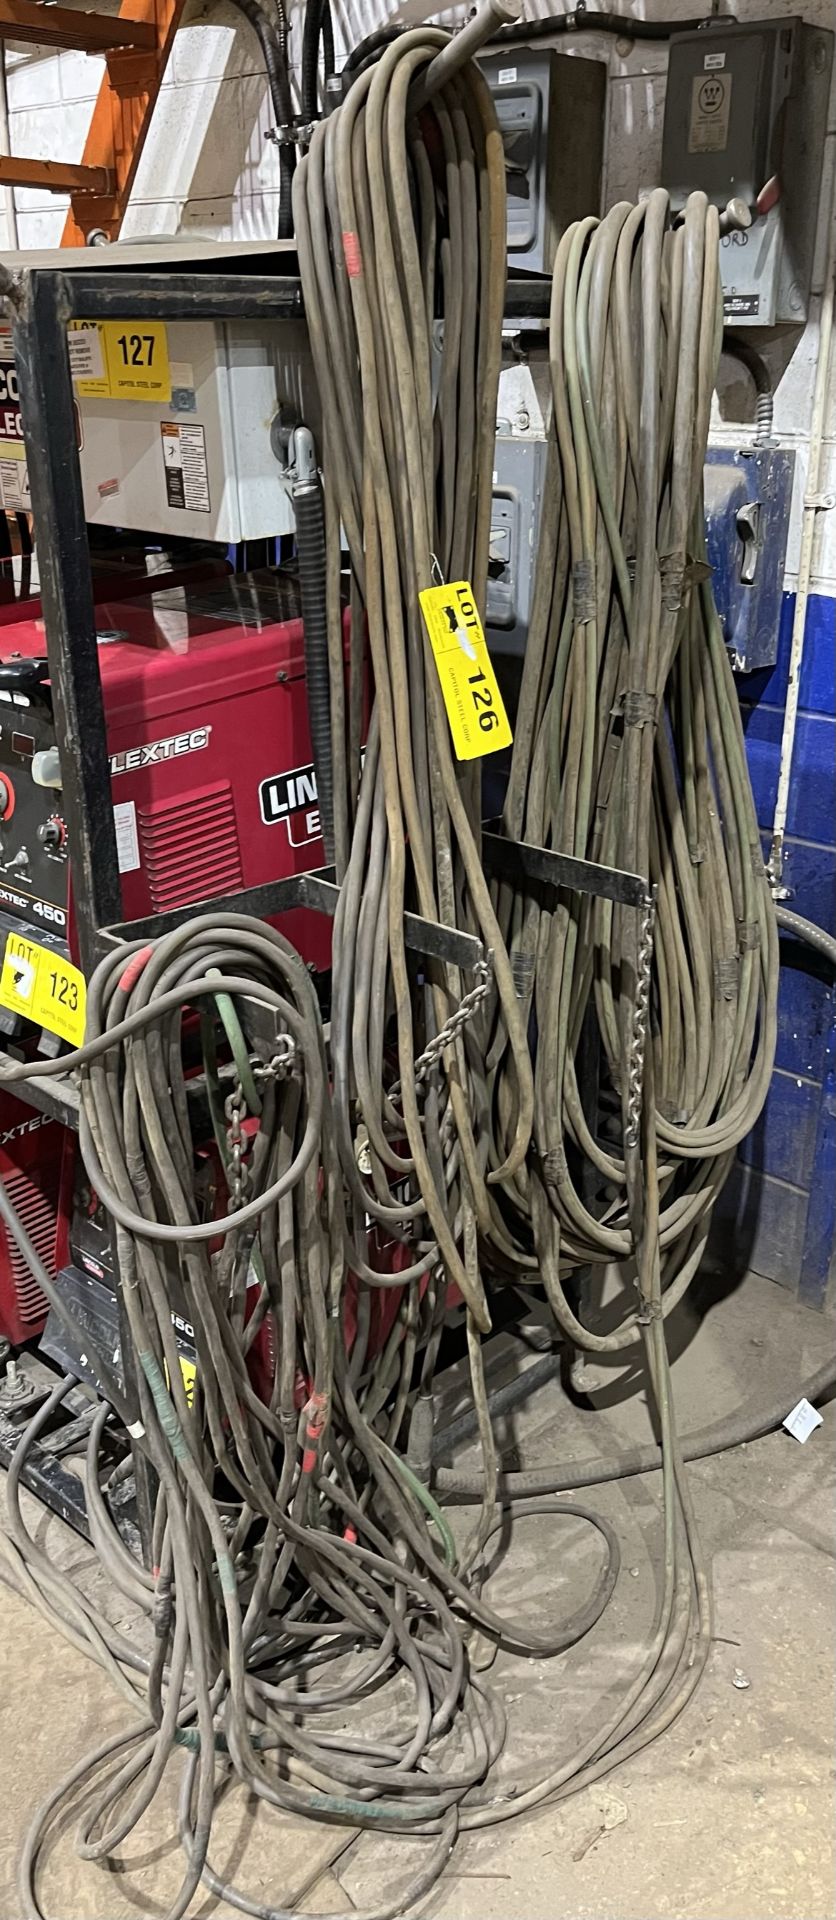 LOT/ WELDING CABLES [RIGGING FEES FOR LOT #126 - $40 USD PLUS APPLICABLE TAXES]